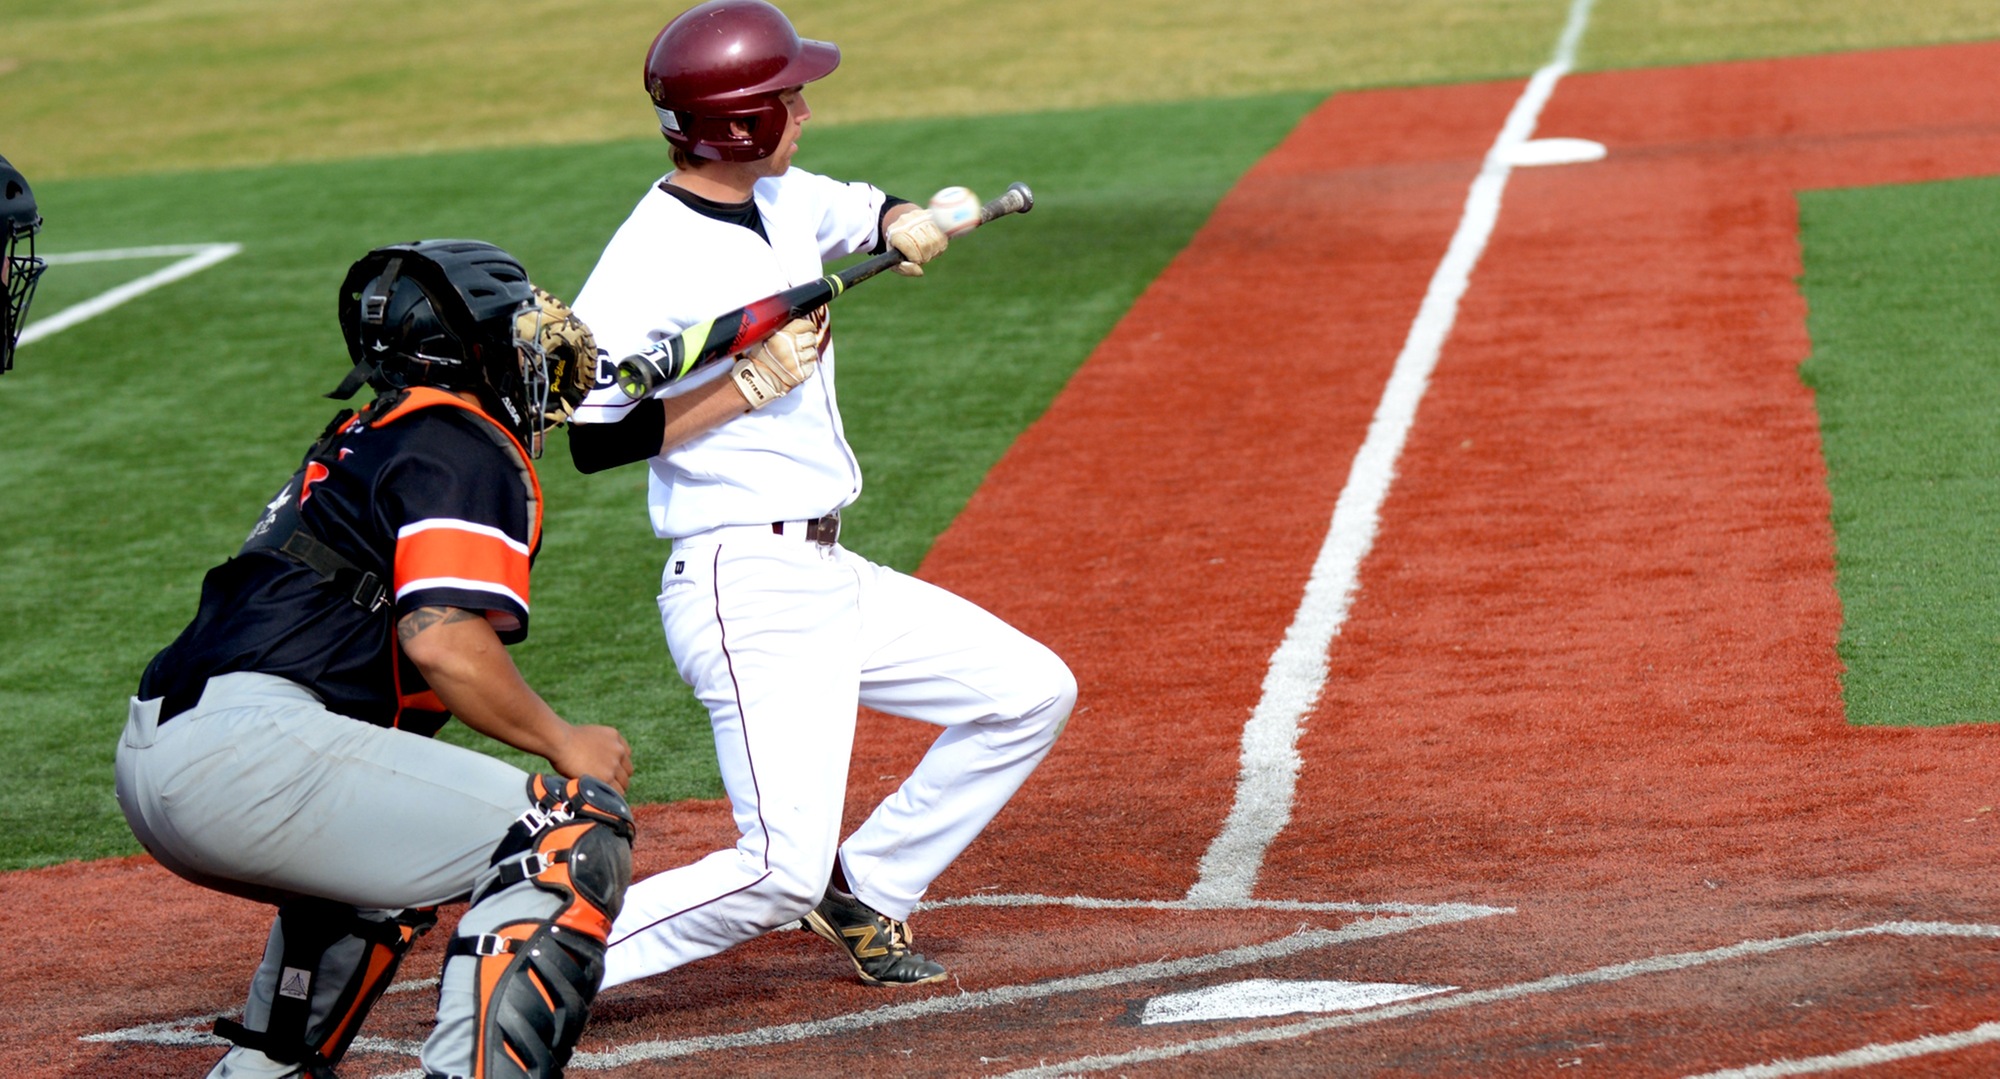 Nate Hoeft ducks and pulls the bat back as he tries to get down a sacrifice bunt during the Cobbers' 10-9 win over Jamestown.